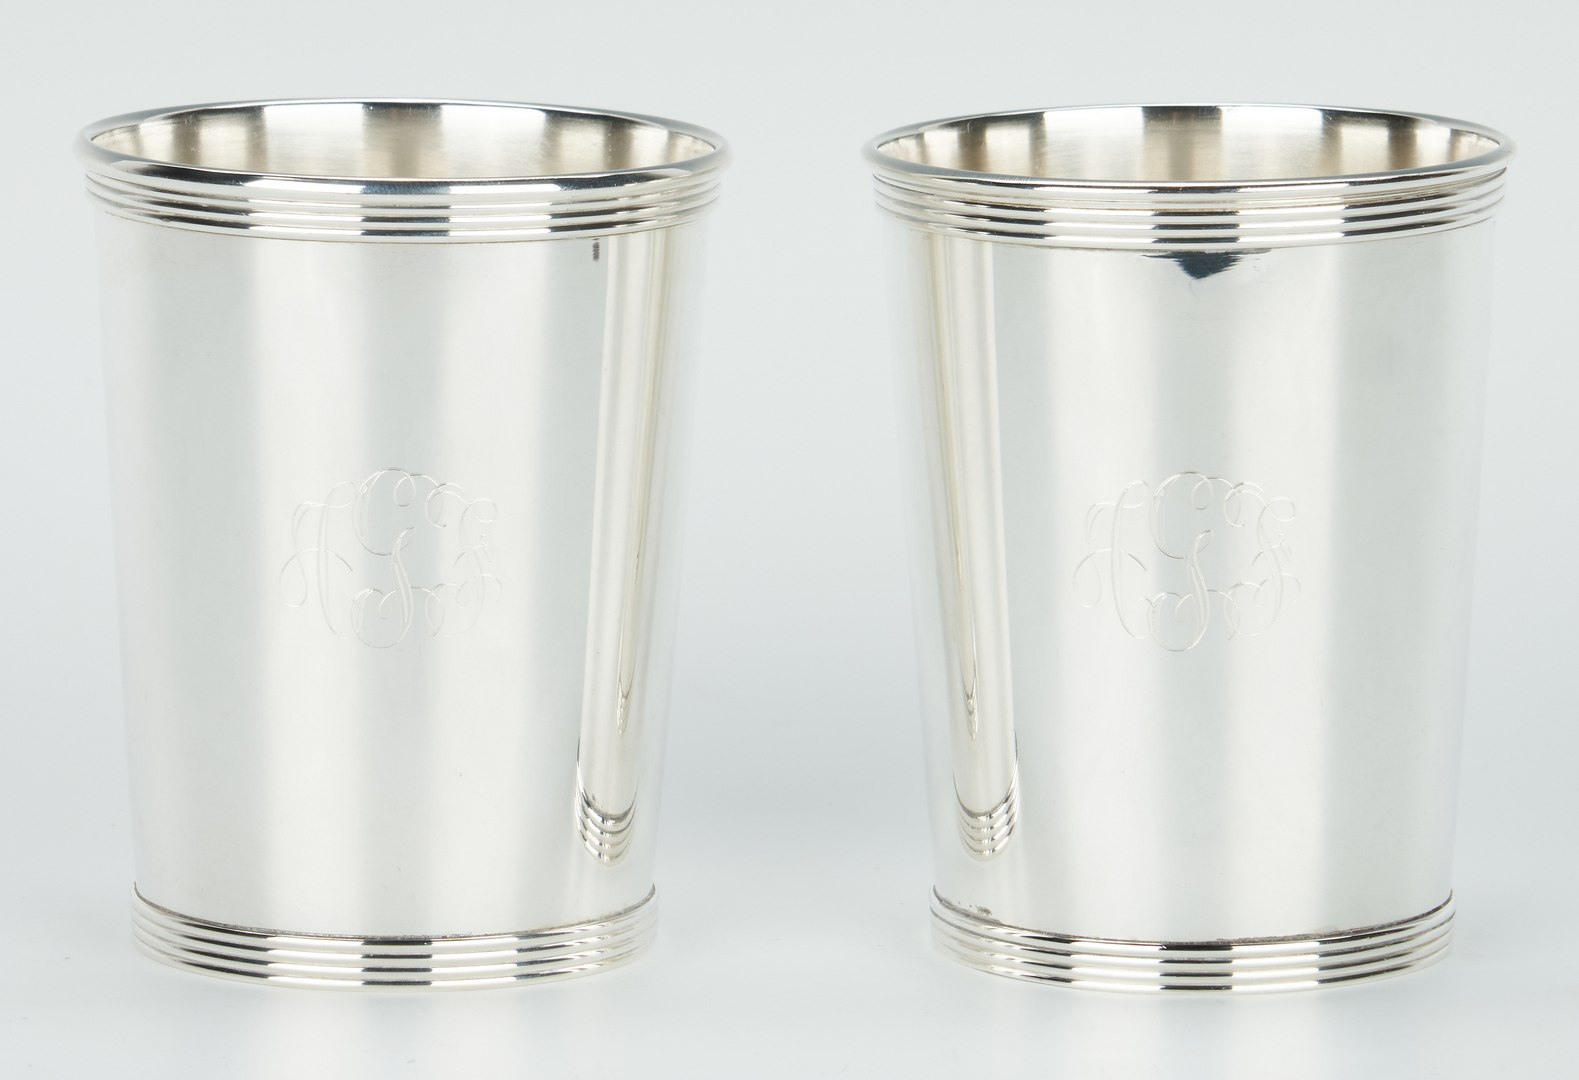 Lot 238: 12 Alvin Sterling Julep Cups